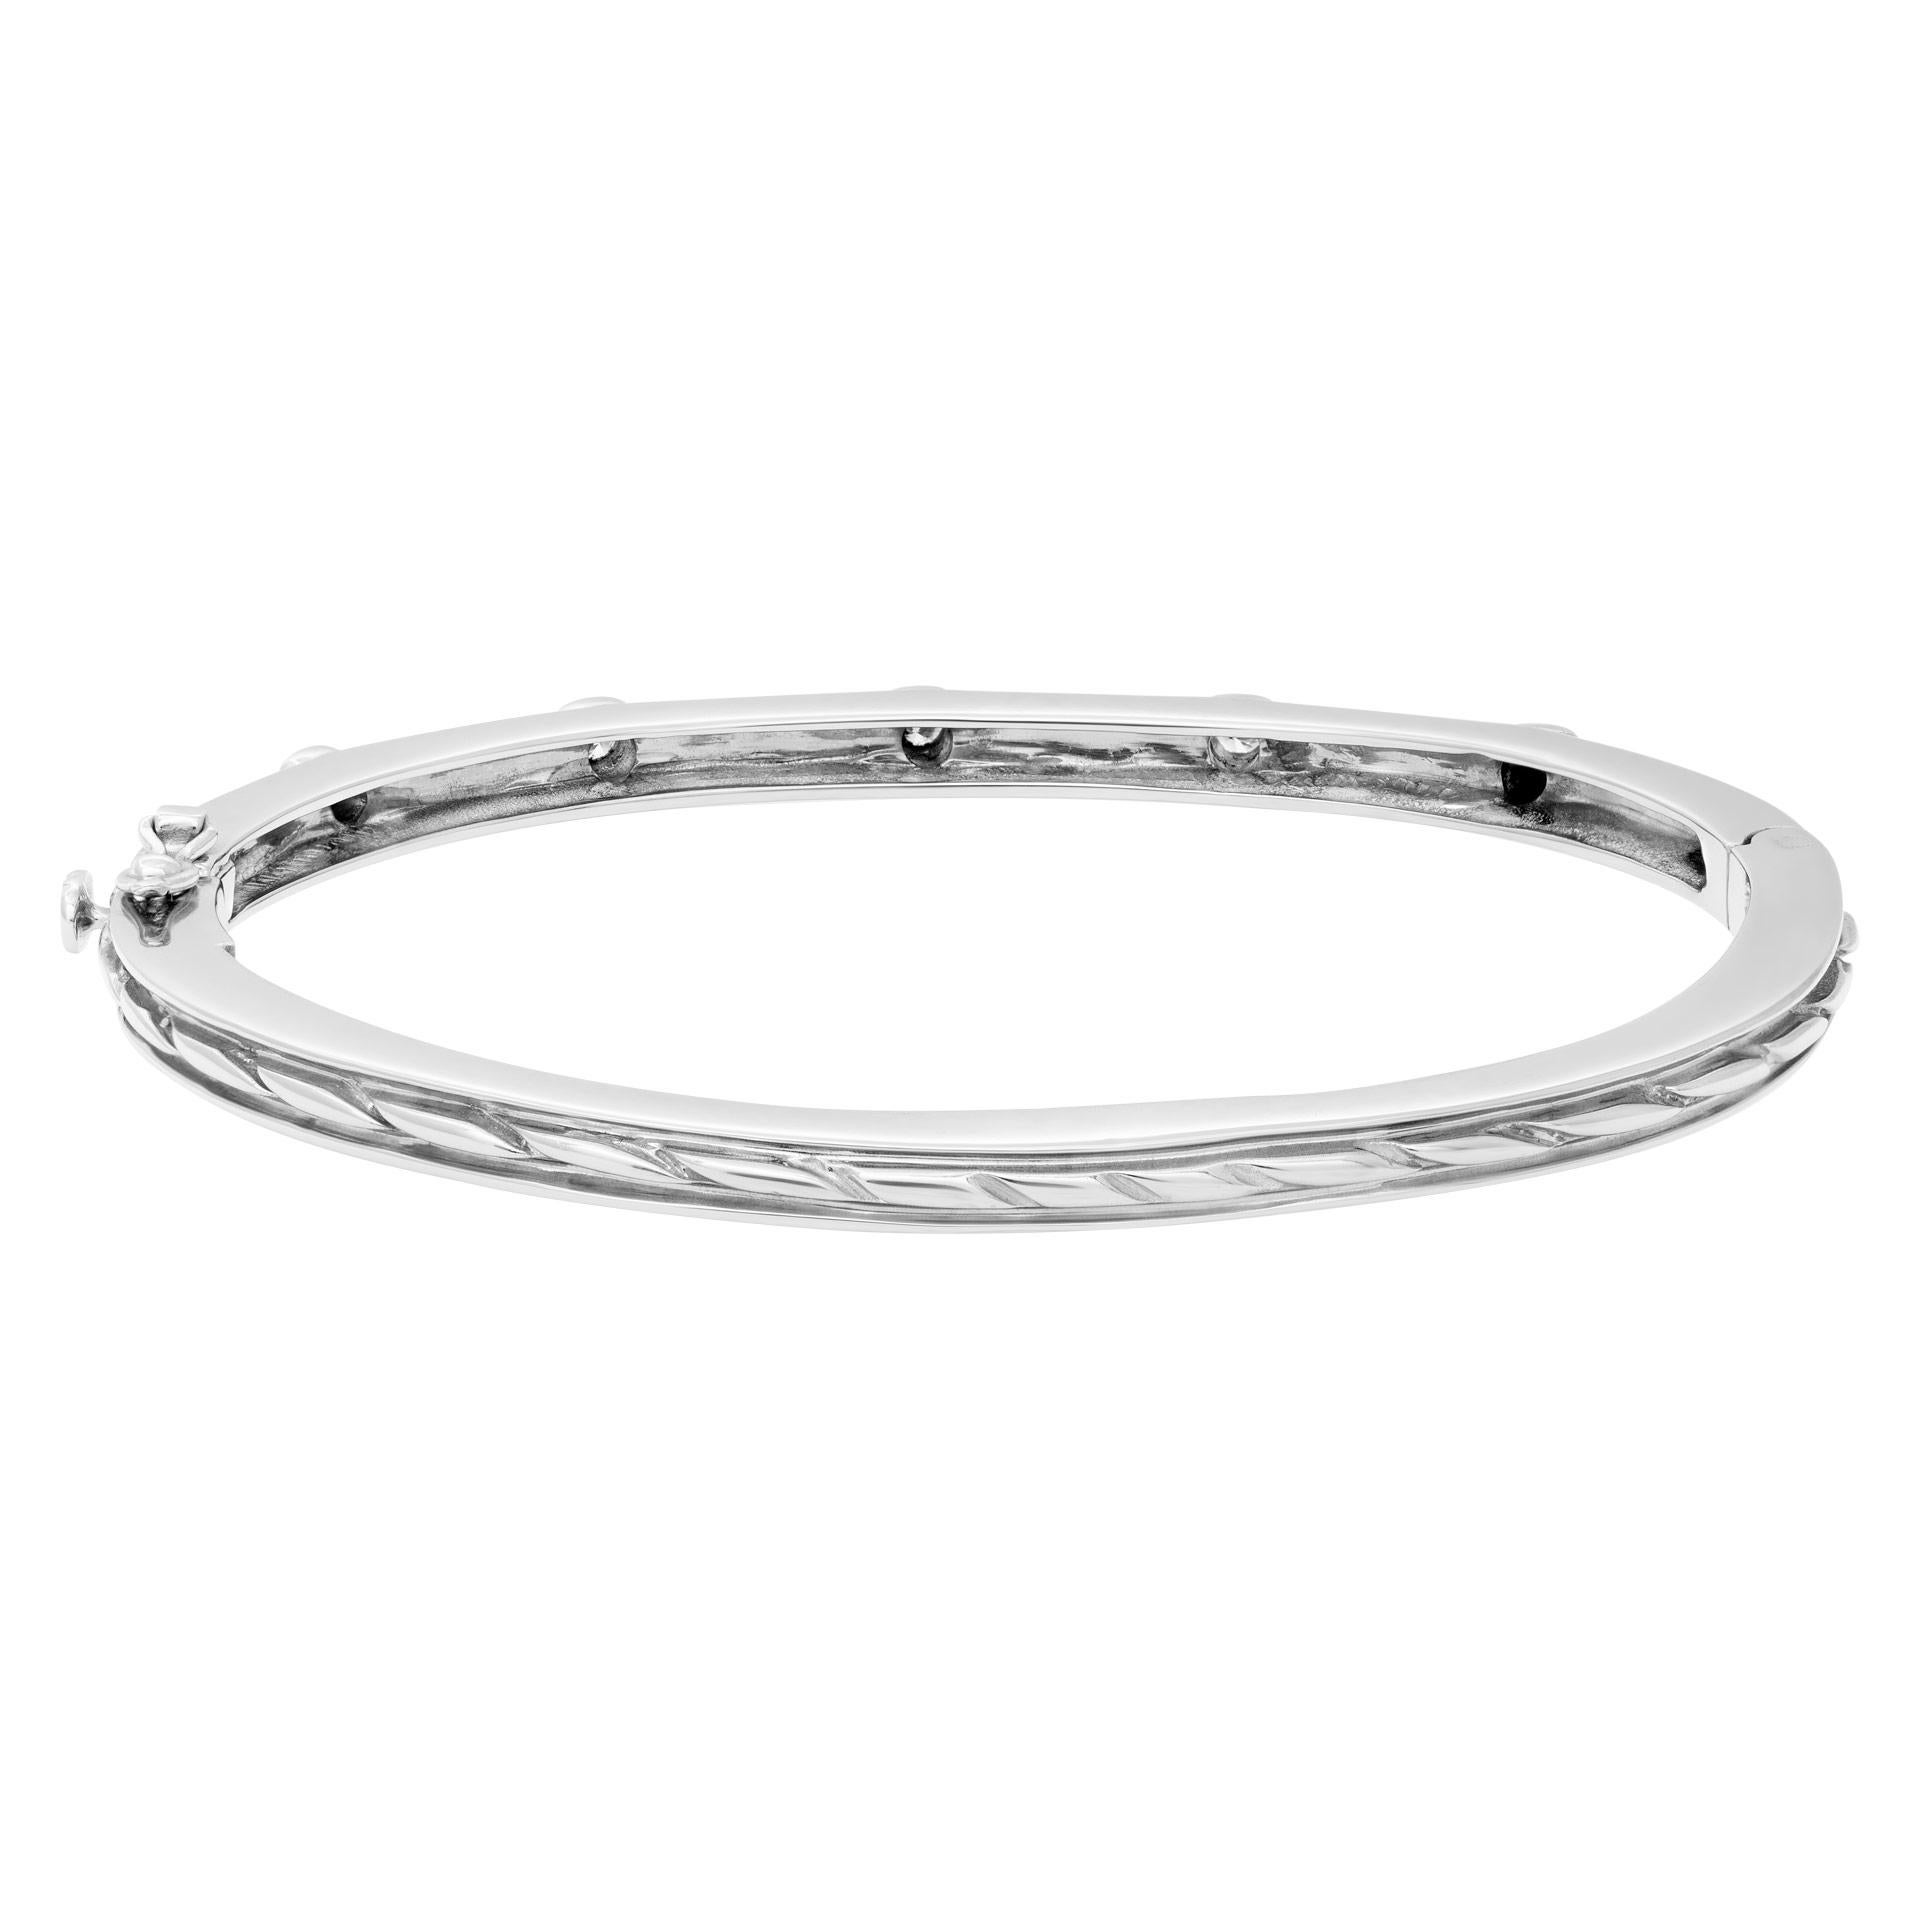 Women's Bangle with Five Diamonds Total 0.50 Carats Set in 14k White Gold For Sale